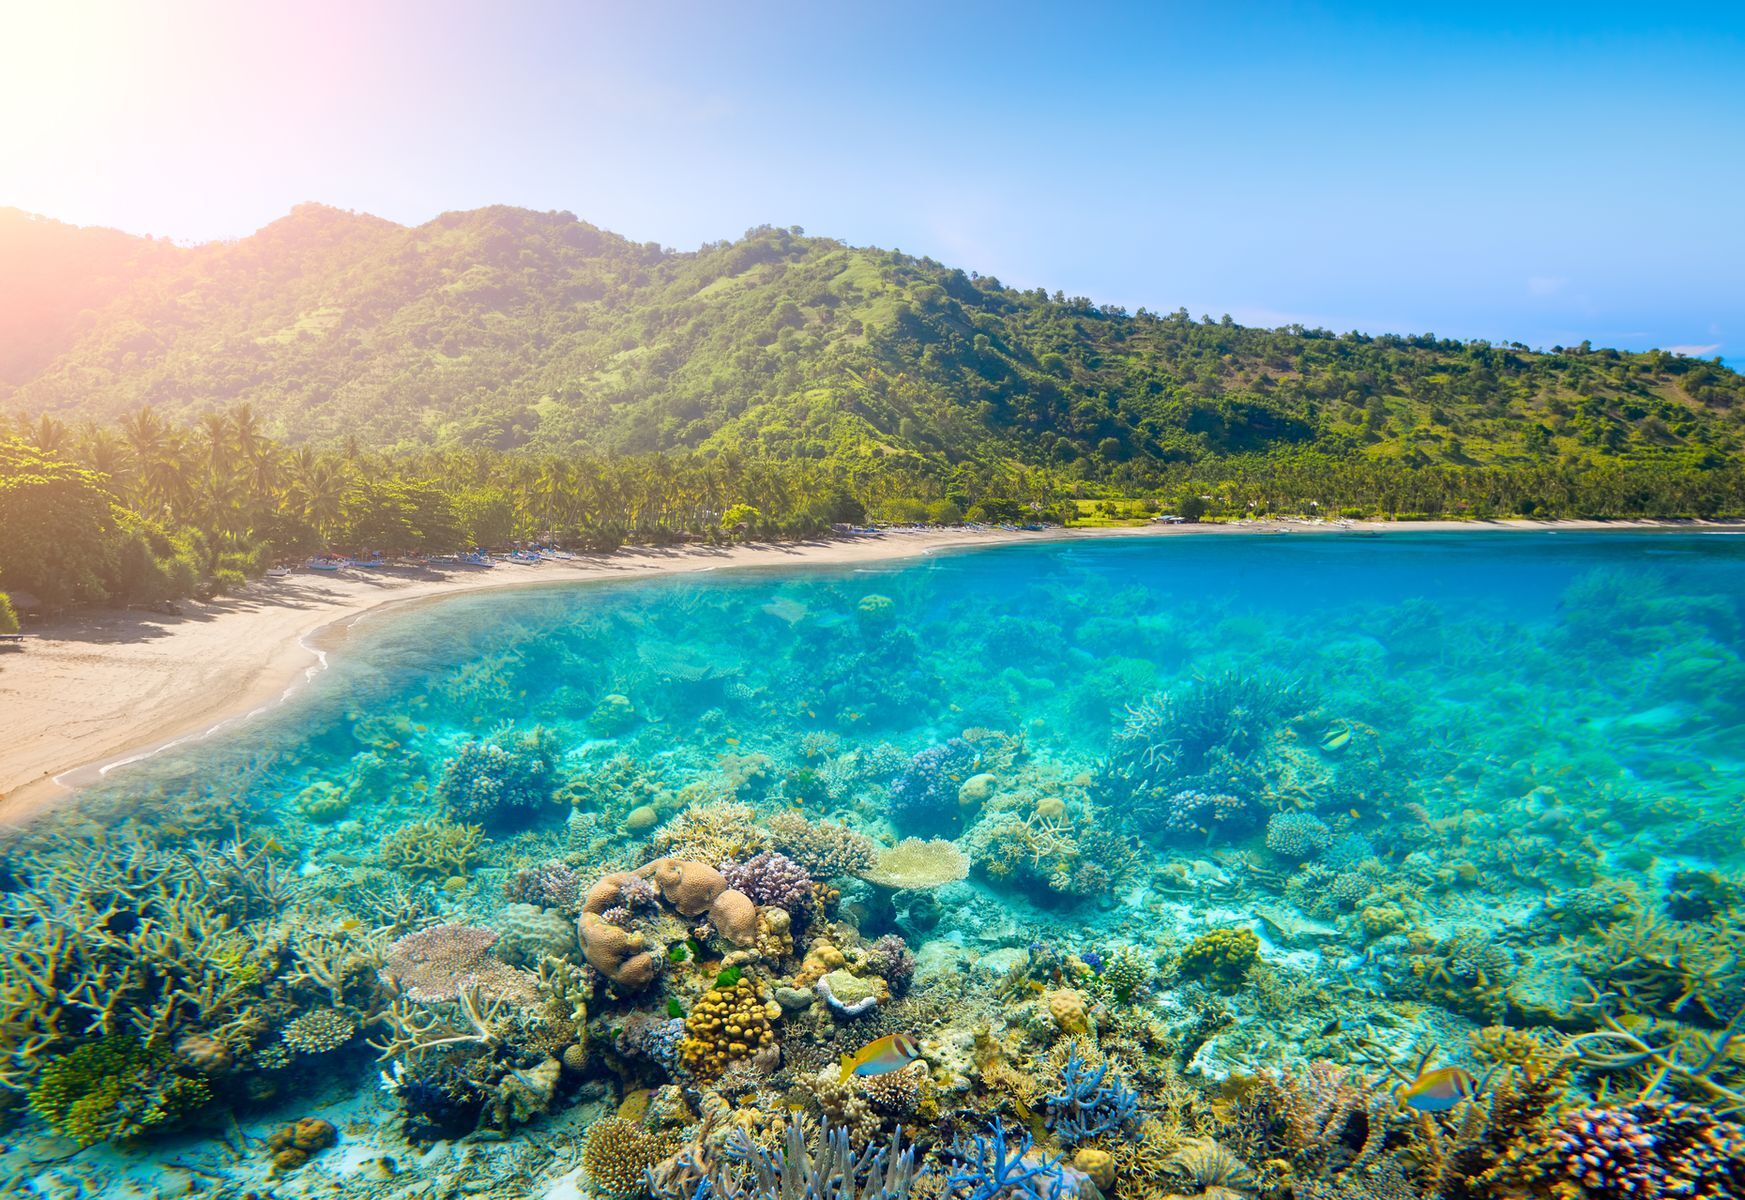 <p>Located just east of Bali, Indonesia, <a href="https://www.indonesia.travel/gb/en/destinations/bali-nusa-tenggara/lombok" class="CMY_Link CMY_Valid" rel="noreferrer noopener">Lombok</a> is sure to please surf enthusiasts who visit Selong-Belanak and other pristine beaches. Hiking enthusiasts won’t be disappointed either, with impressive peaks including Mount Rinjani. Less crowded than Bali, Lombok immerses visitors in Indonesian culture with its traditional villages, flamboyant festivals, and spectacular waterfalls.</p>